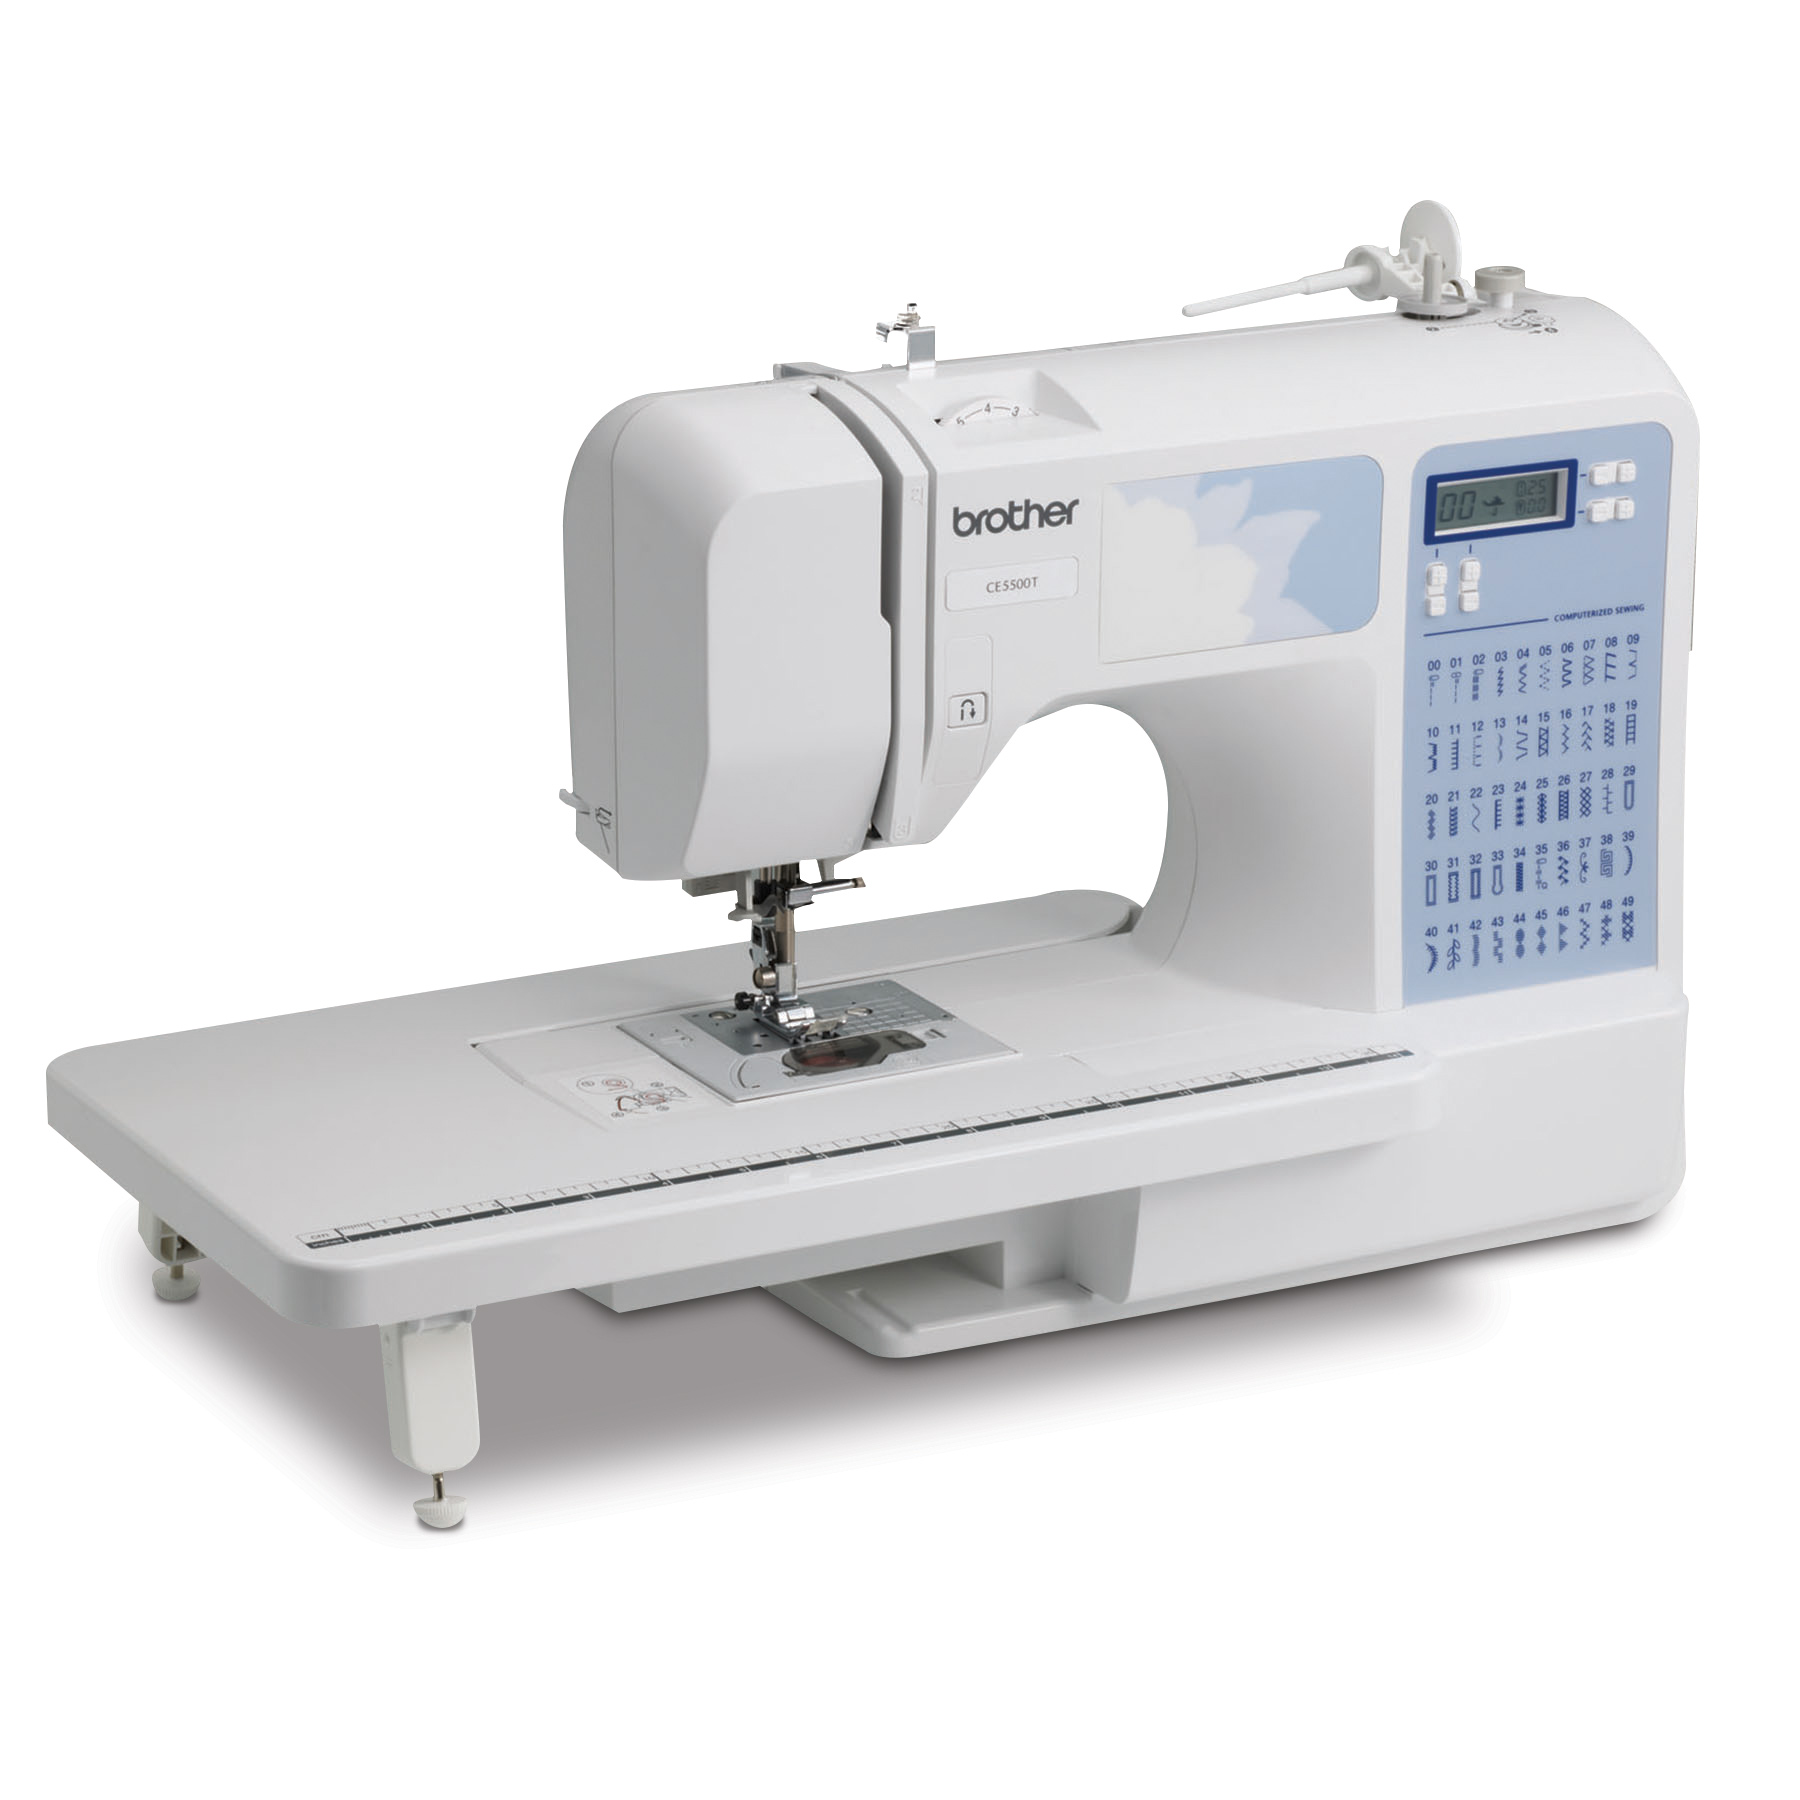 Image of Brother RCE5500T Refurbished Computerized Sewing Machine